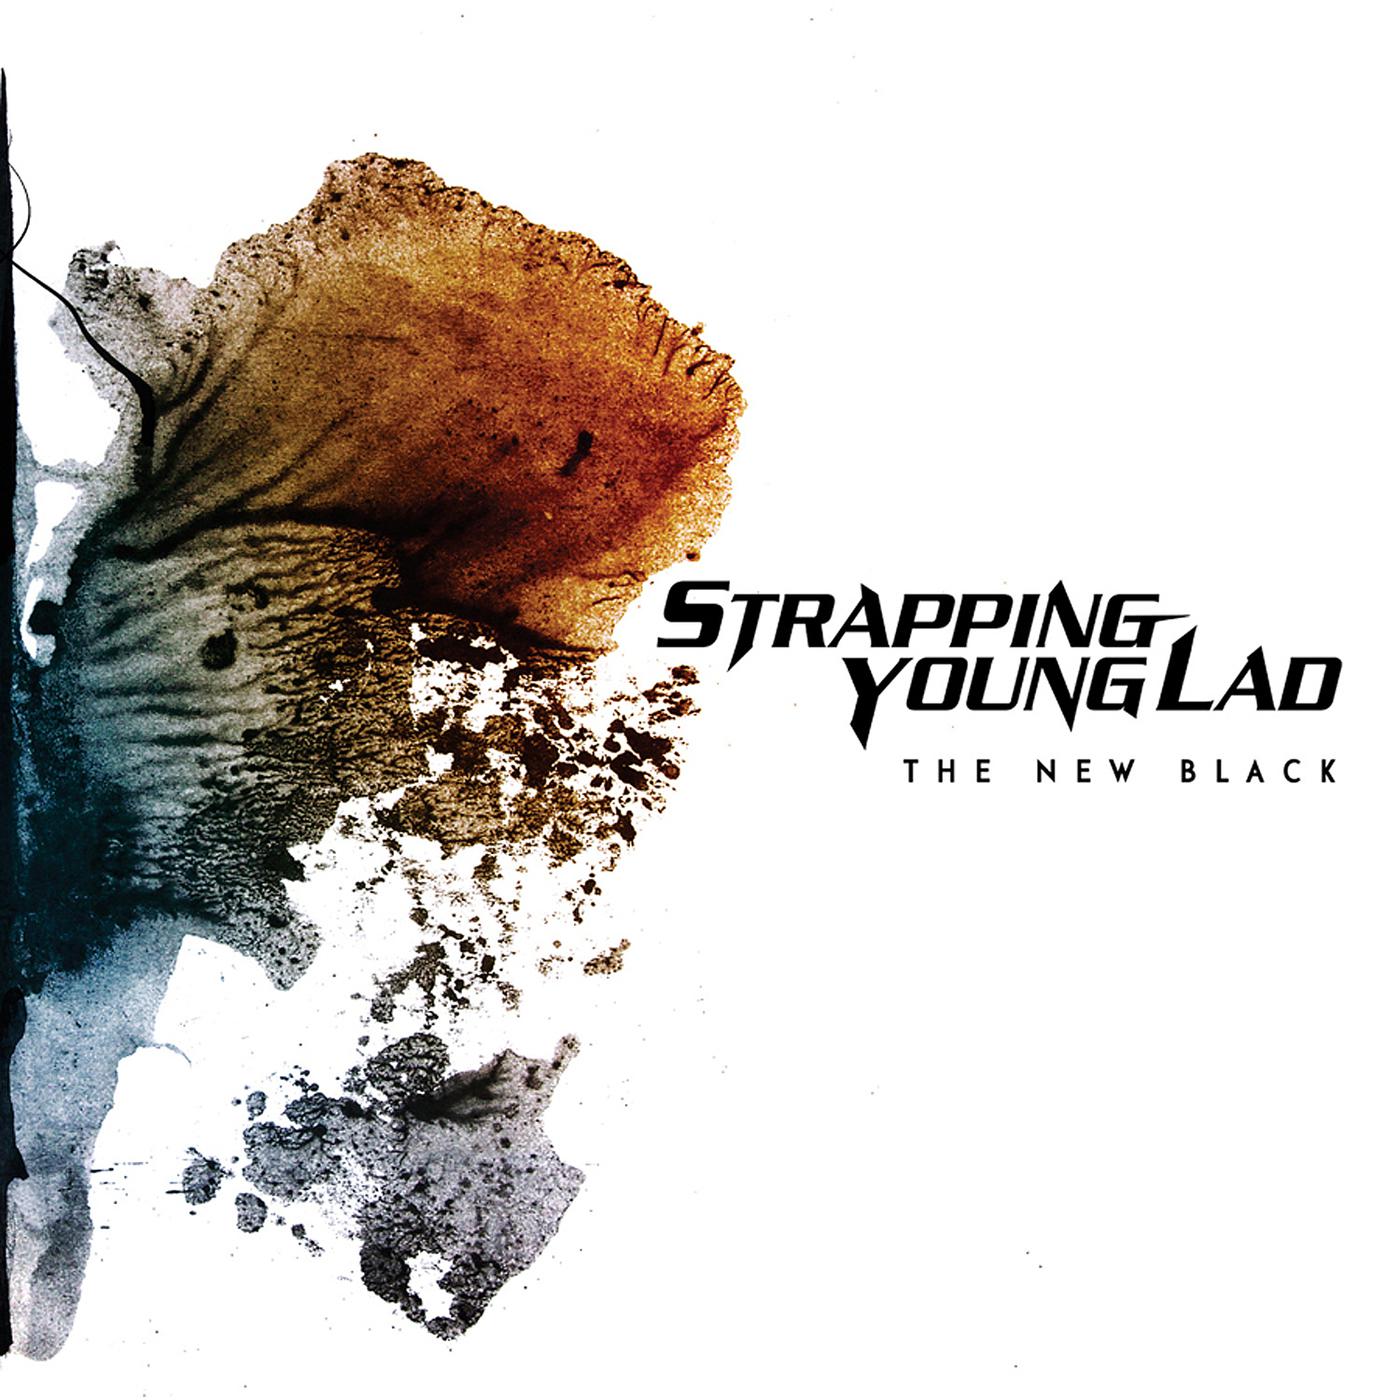 Strapping Young Lad - Far Beyond Metal